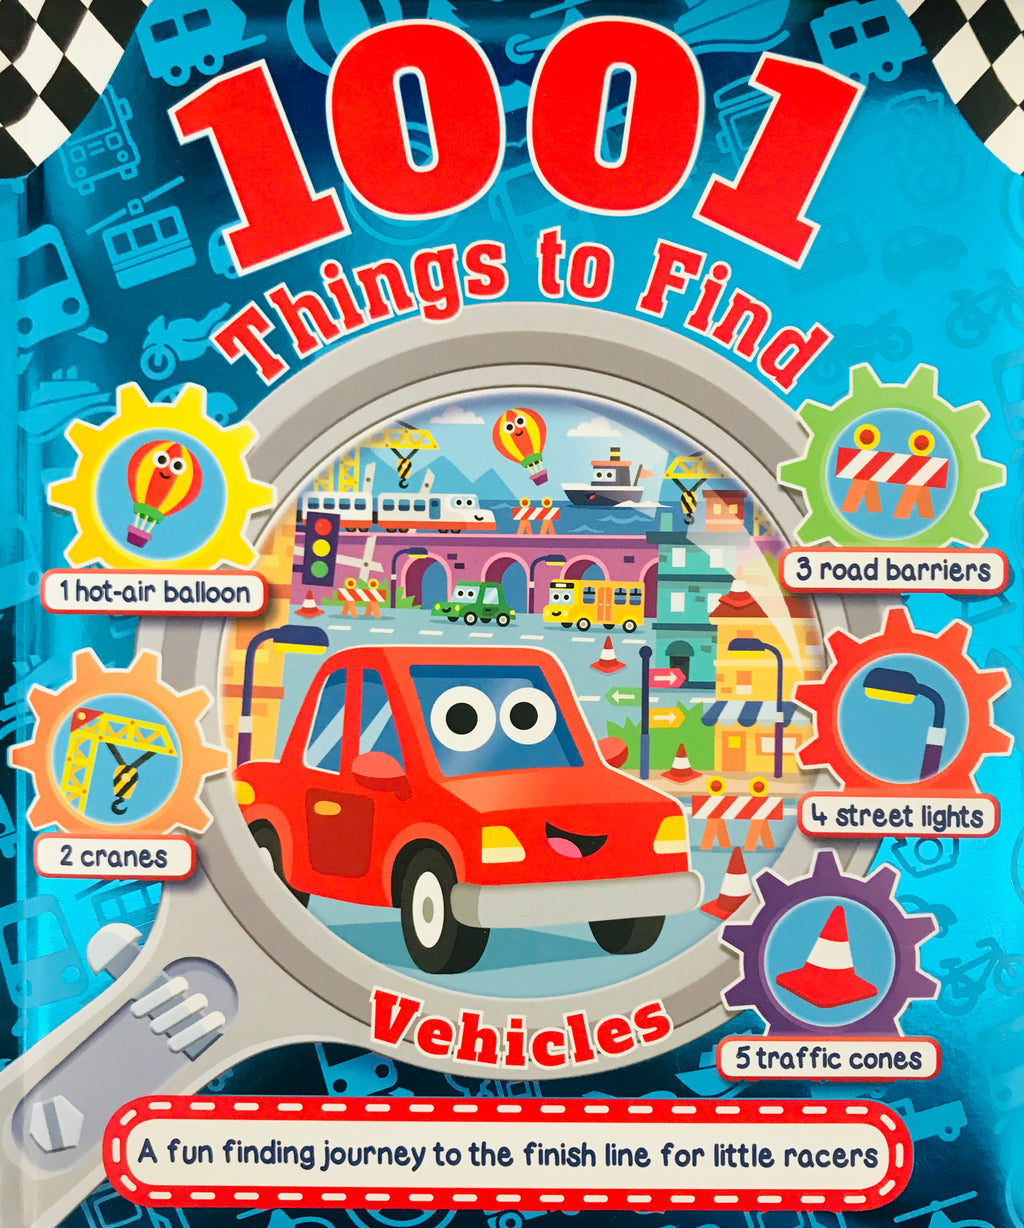 1001 things to find: Vehicles